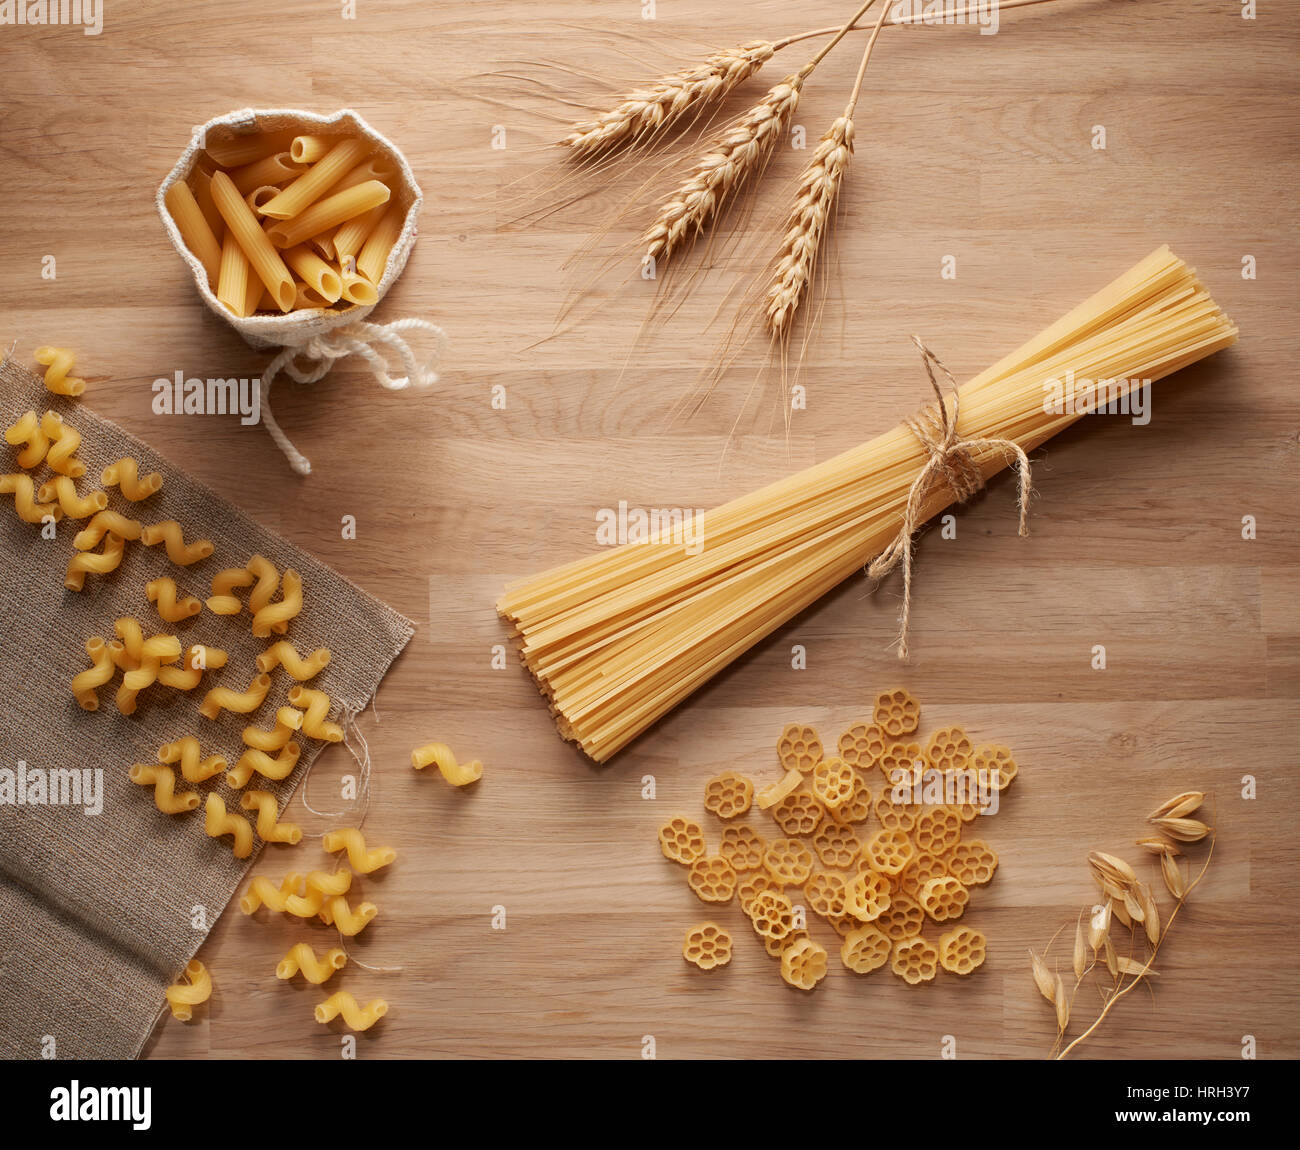 Top view of several types of dry pasta and wheat ears on light wooden table Stock Photo